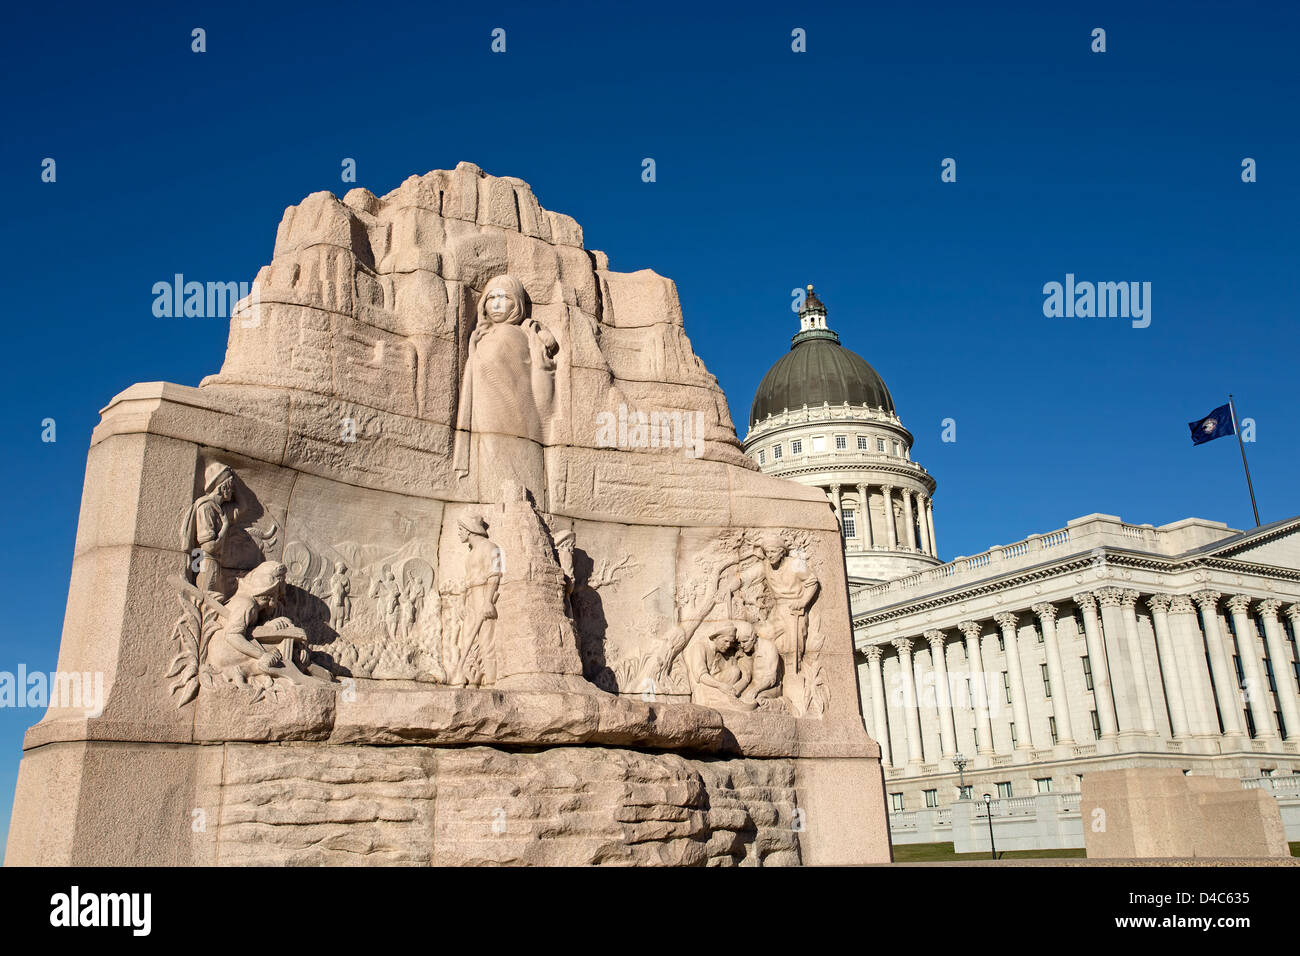 Utah State Capital Mormon Battalion Monument. Utah State capital building high on a hill overlooking the city of Salt Lake City. Stock Photo